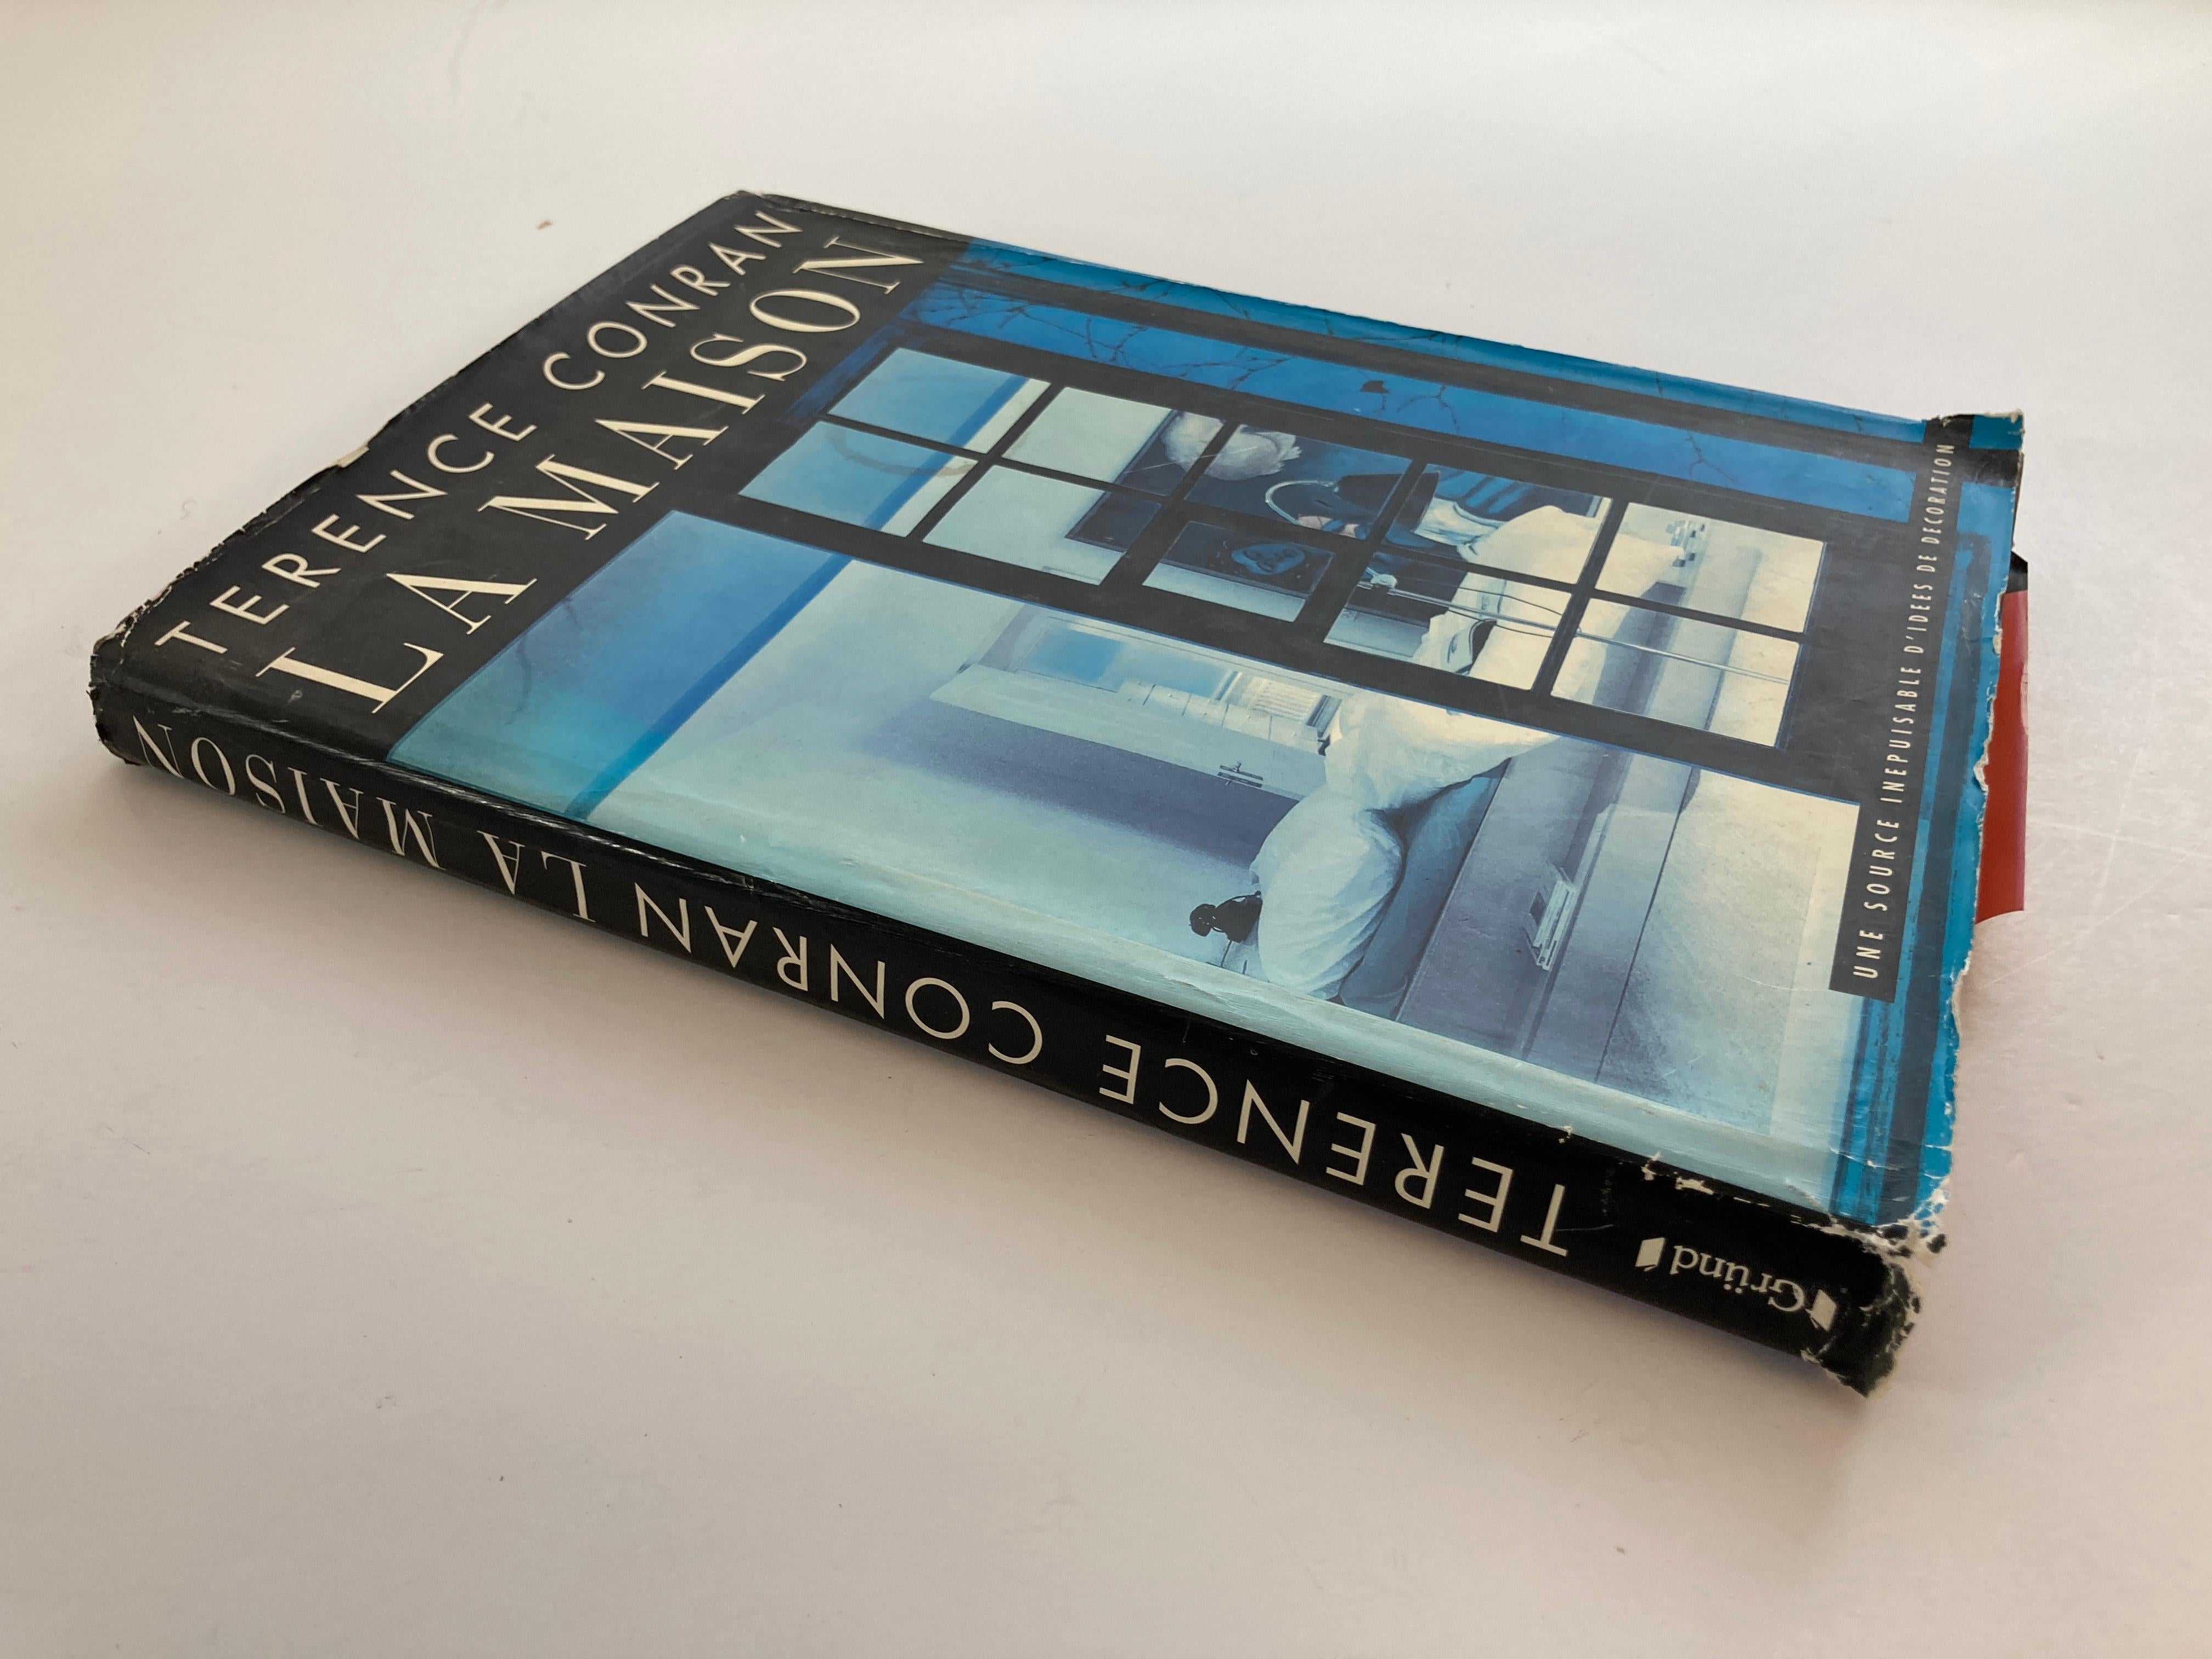 La Maison Book, by Sir Terence Conran, French First Edition, 1995
La Maison, une source inepuisable d'idees de decoration (The House, an inexhaustible source of decoration ideas) book by Sir Terence Conran, 1994. Marrying practical living with